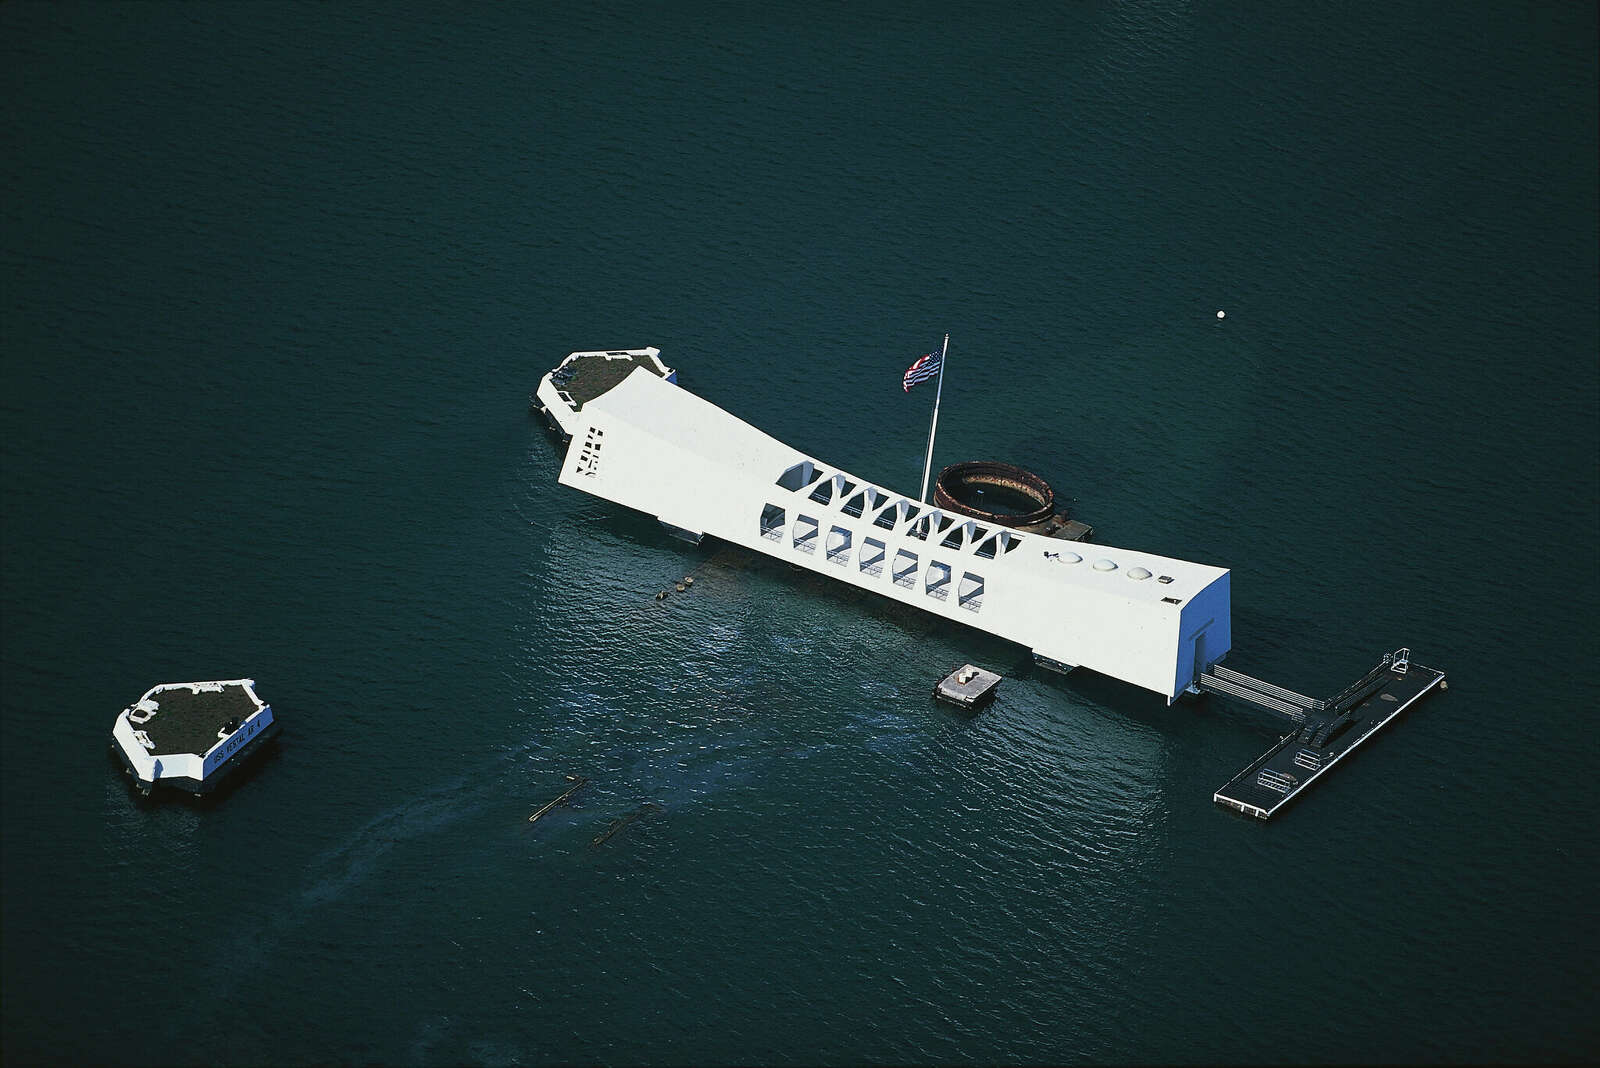 Aerial view of the USS Arizona Memorial, monument in memory of the USS Arizona battleship which was sunk during the Japanese attack on December 7, 1941, World War II, Oahu island, Hawaii, USA.

